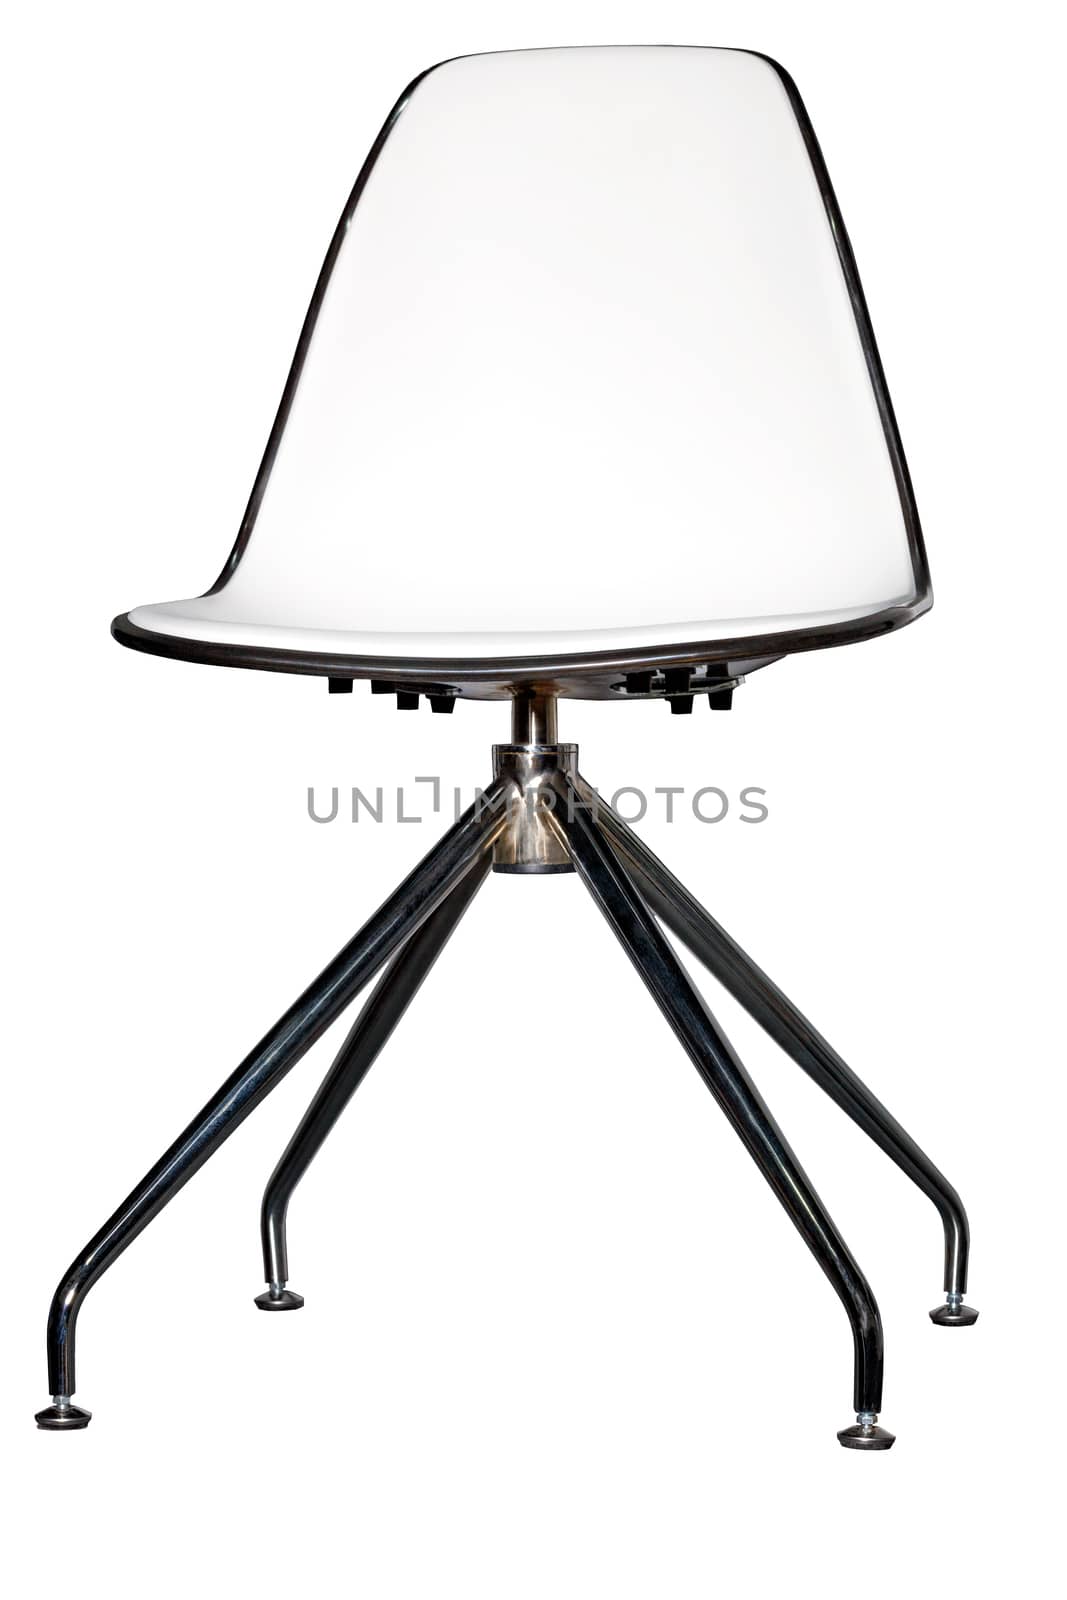 A metal chair rotating around its axis, with a soft white saddle and a comfortable arched back, photographed in front, isolated on a white background.